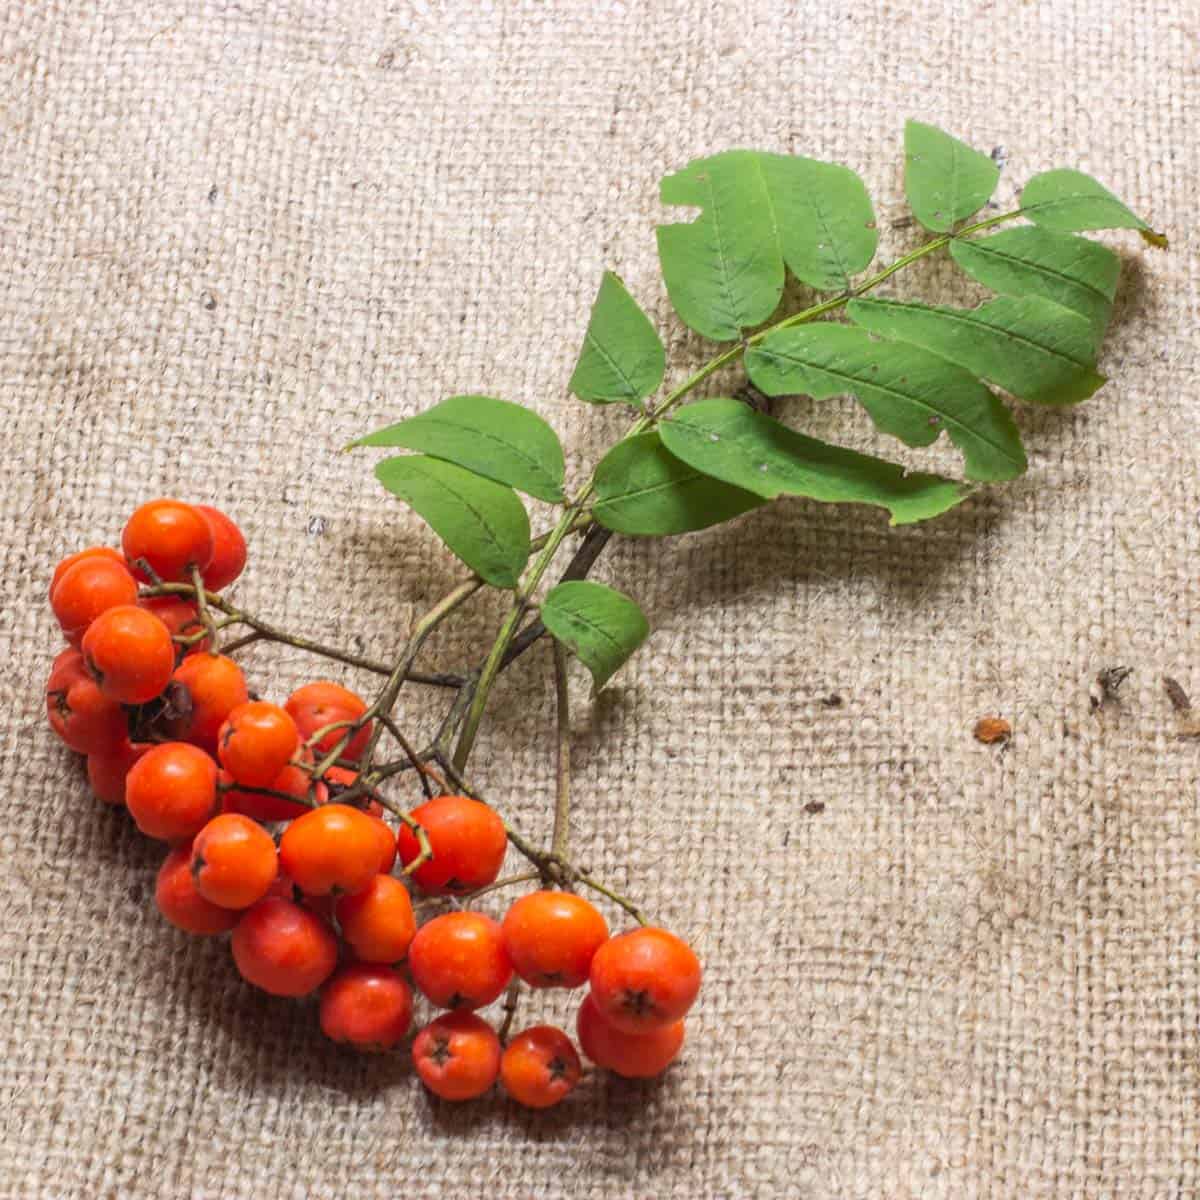 rowanberries on a branch on a burlap sack 